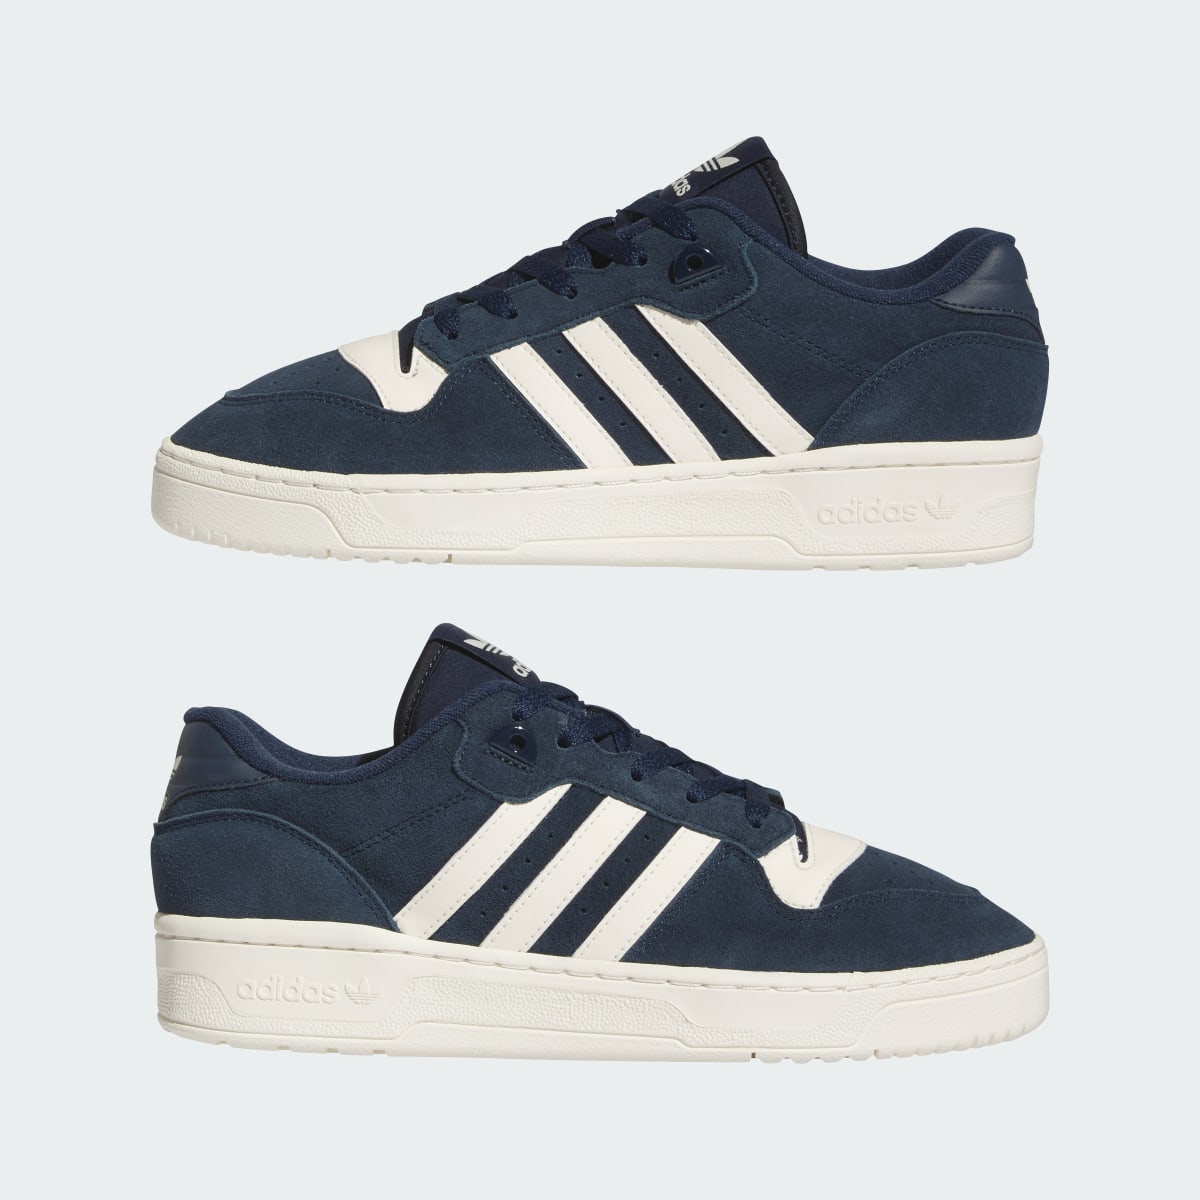 Adidas Rivalry Low Shoes. 8